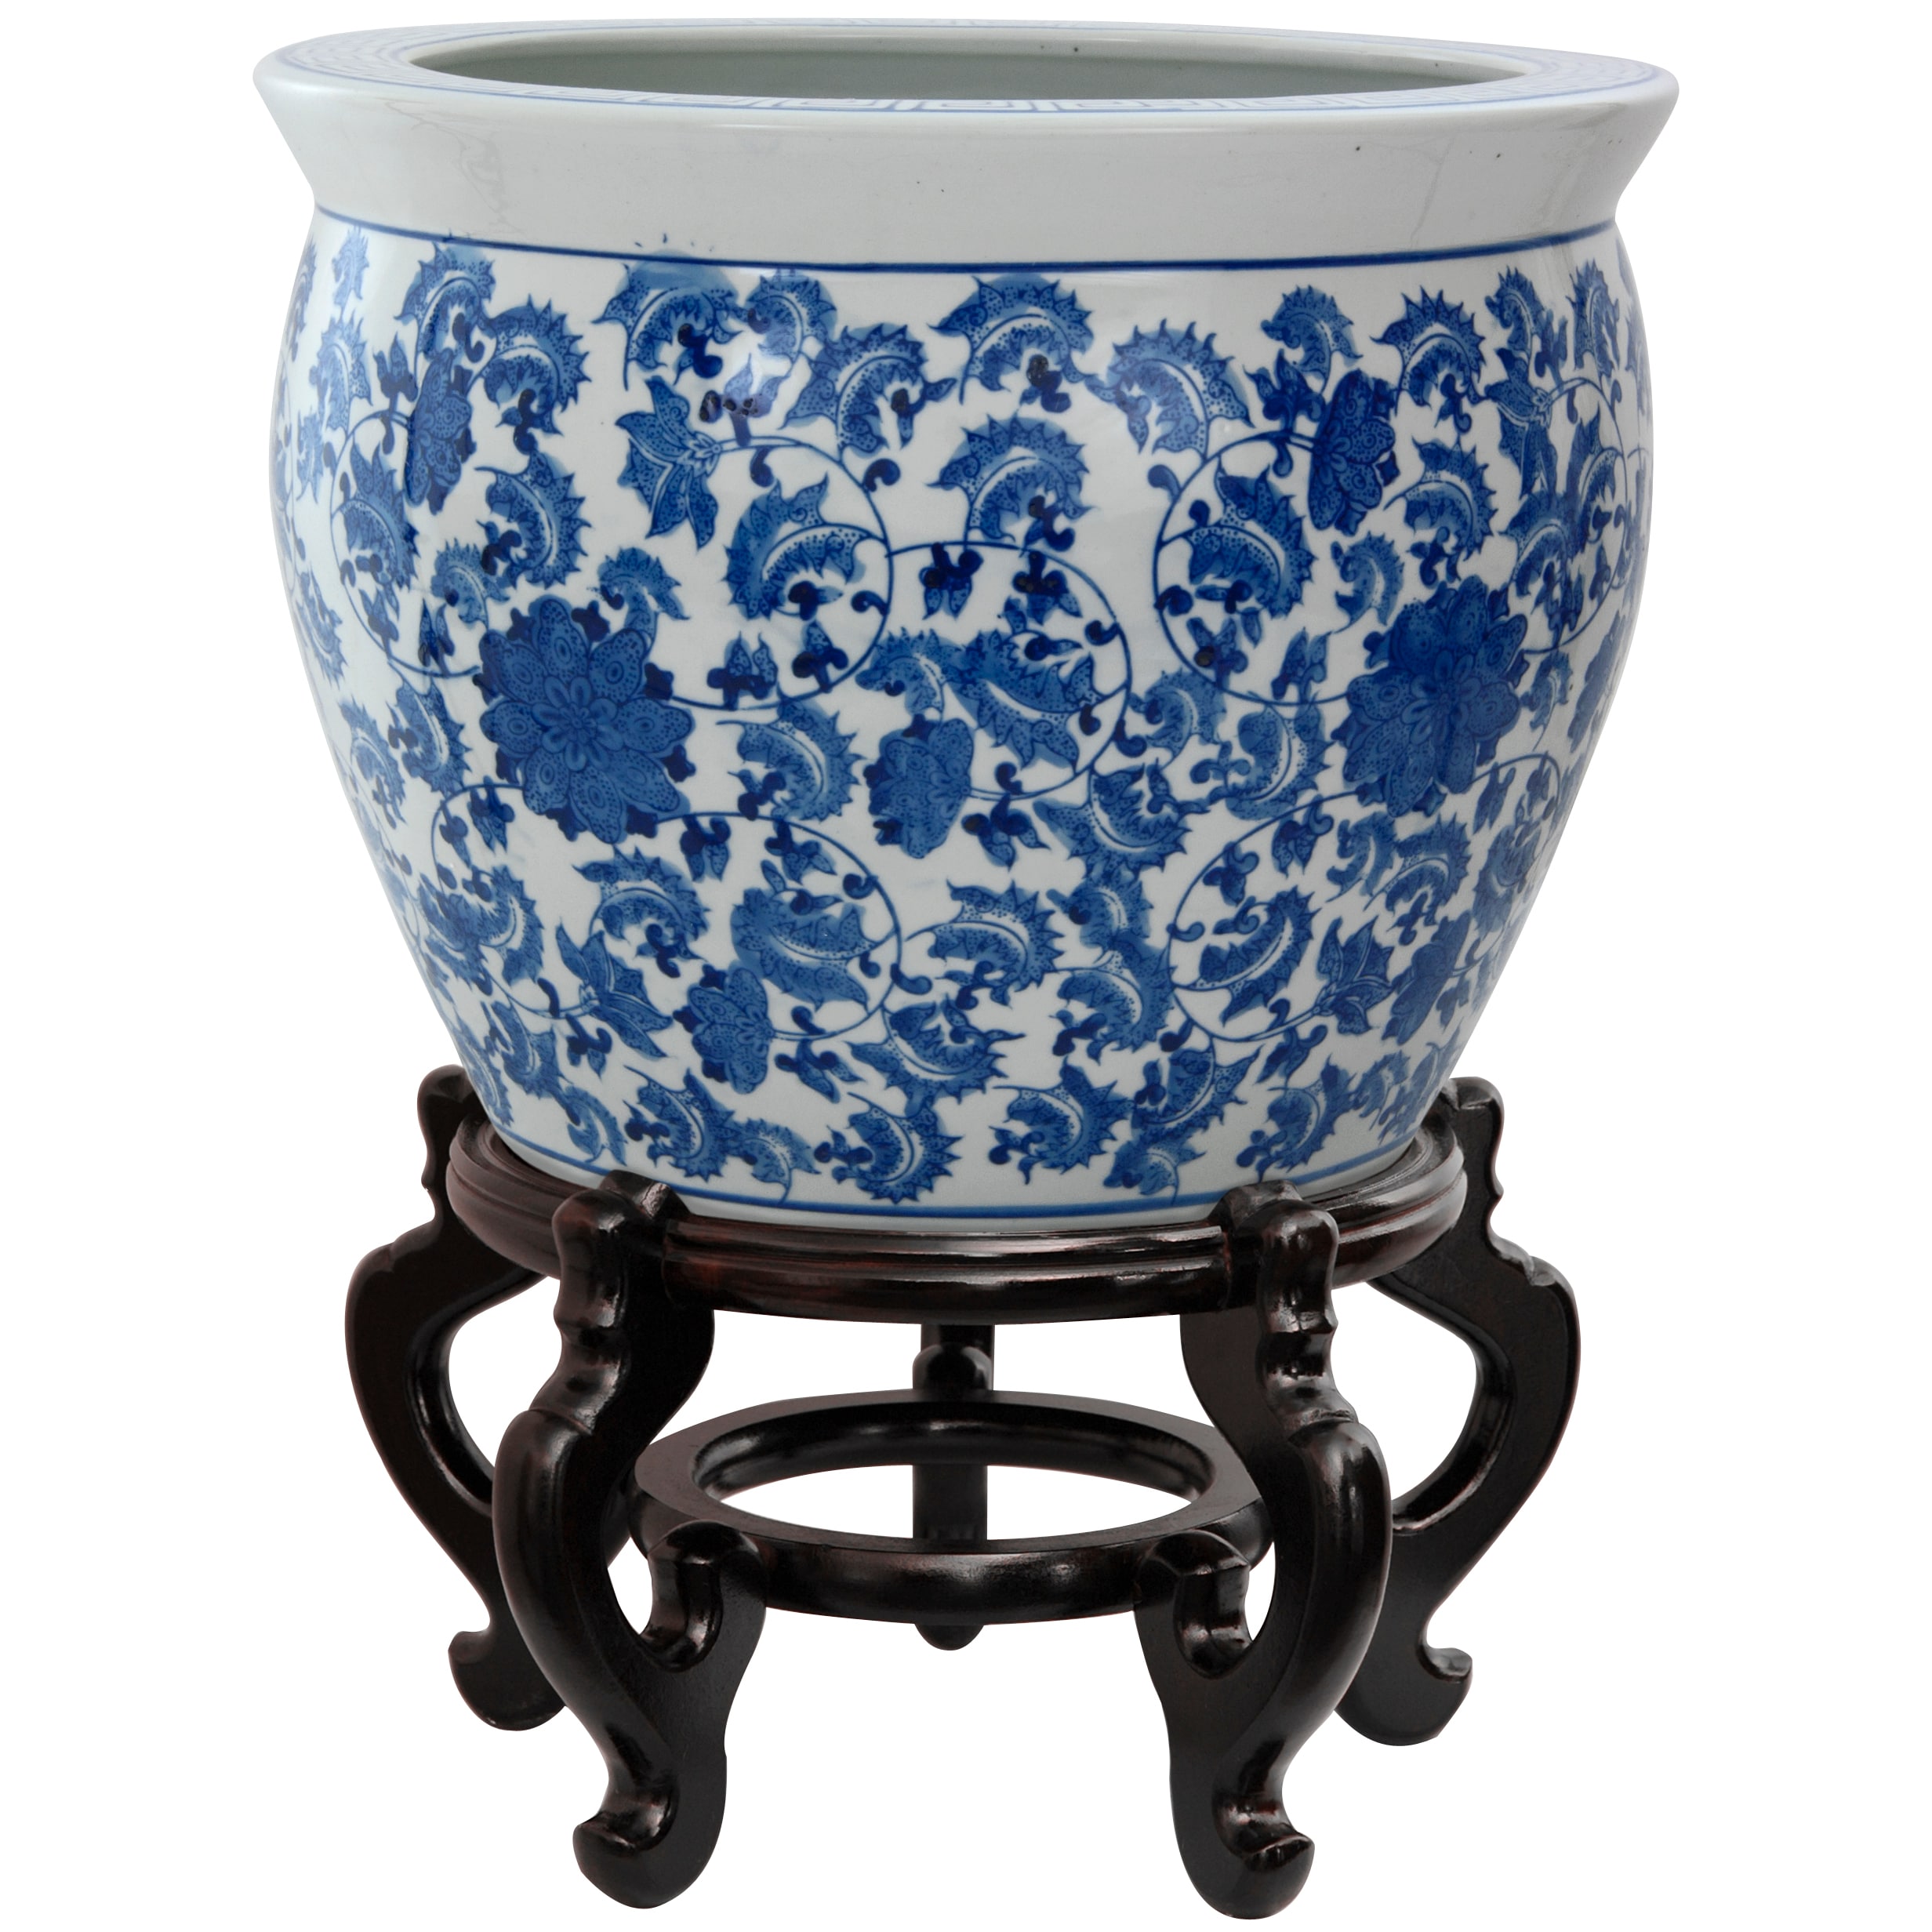 Red Lantern 18.5-in W x 13.5-in H Blue and White Floral Porcelain Indoor/Outdoor Planter in the Pots & Planters at Lowes.com